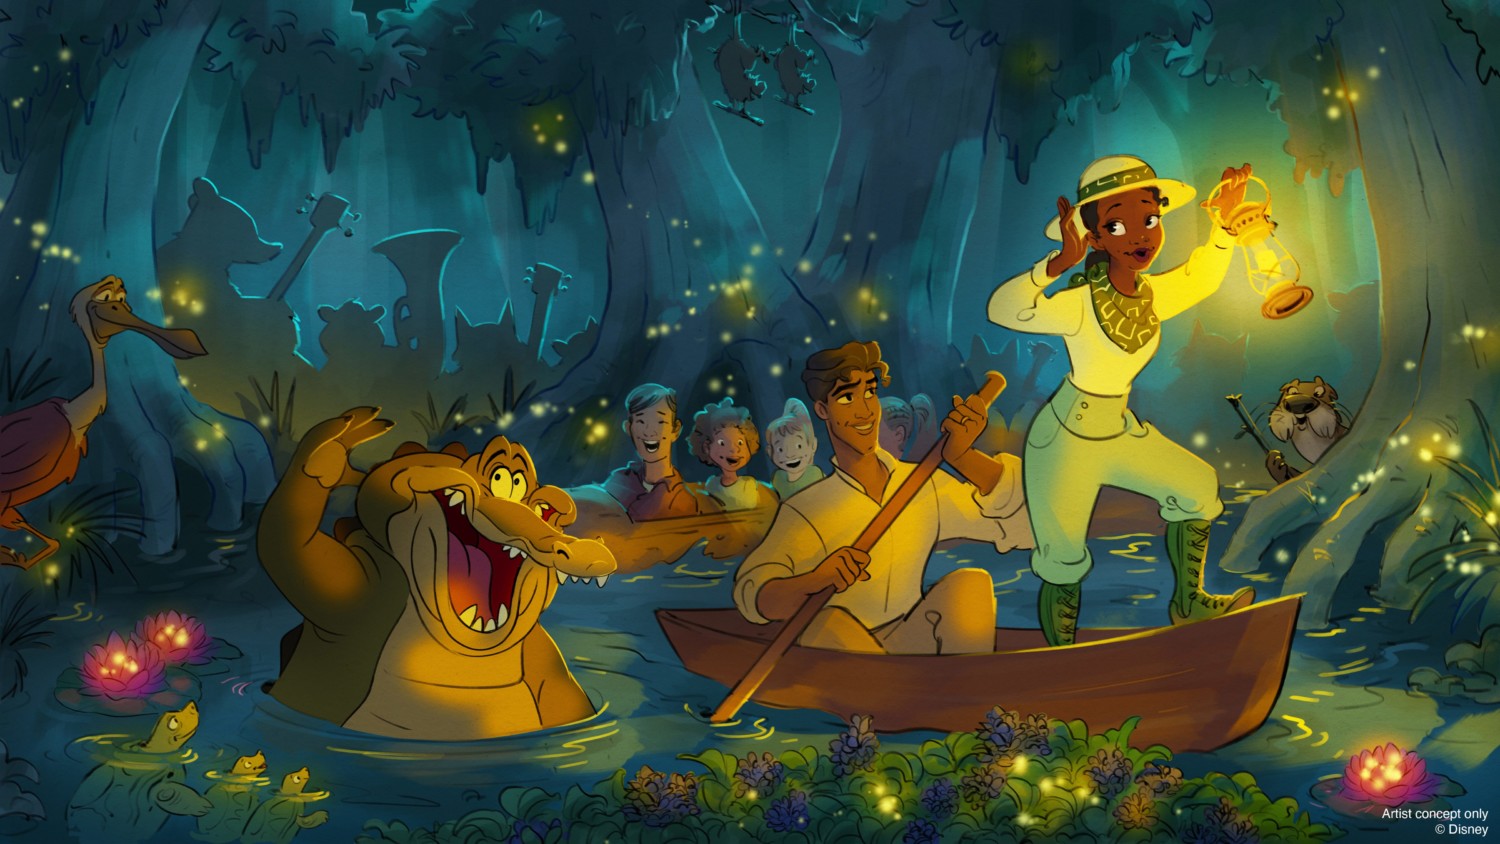 Concept art for Princess and the Frog redo of Splash Mountain